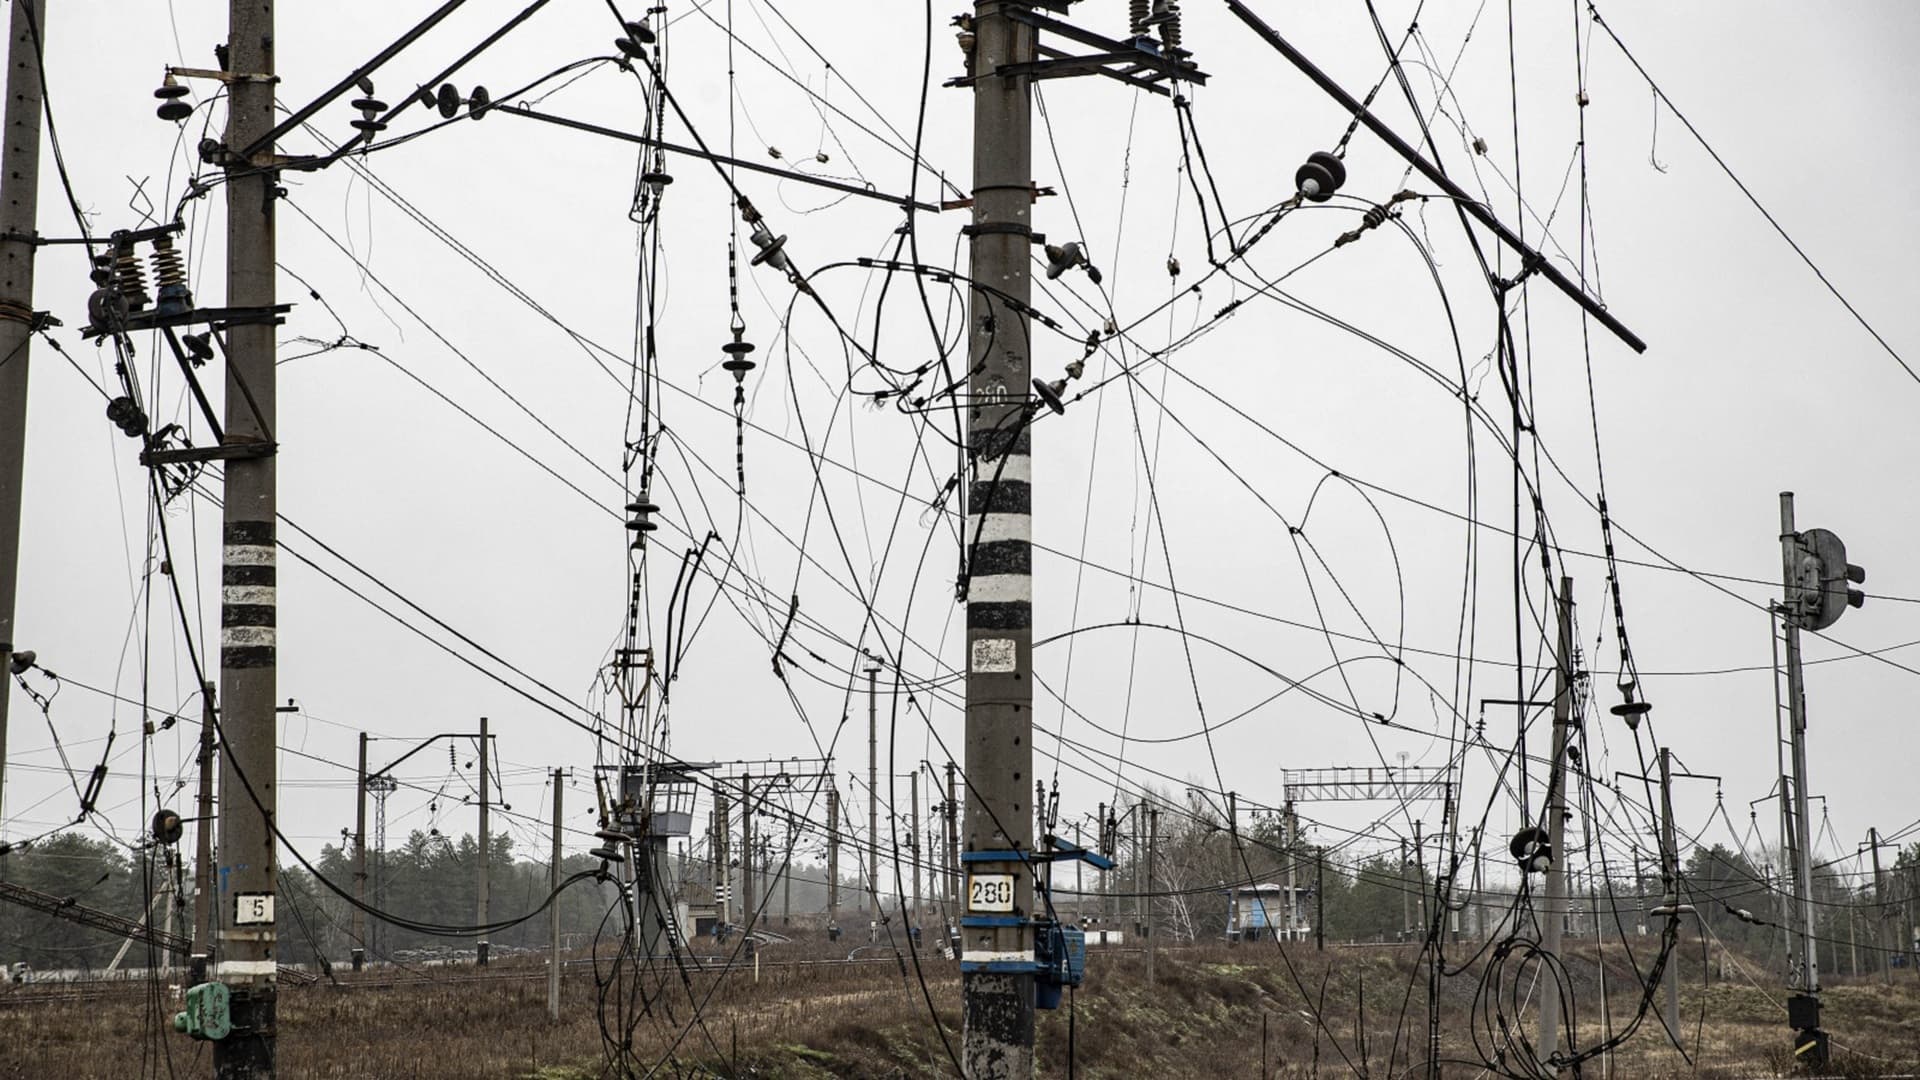 A view of damaged electrical wires after Ukrainian army retaken control from the Russian forces in Lyman